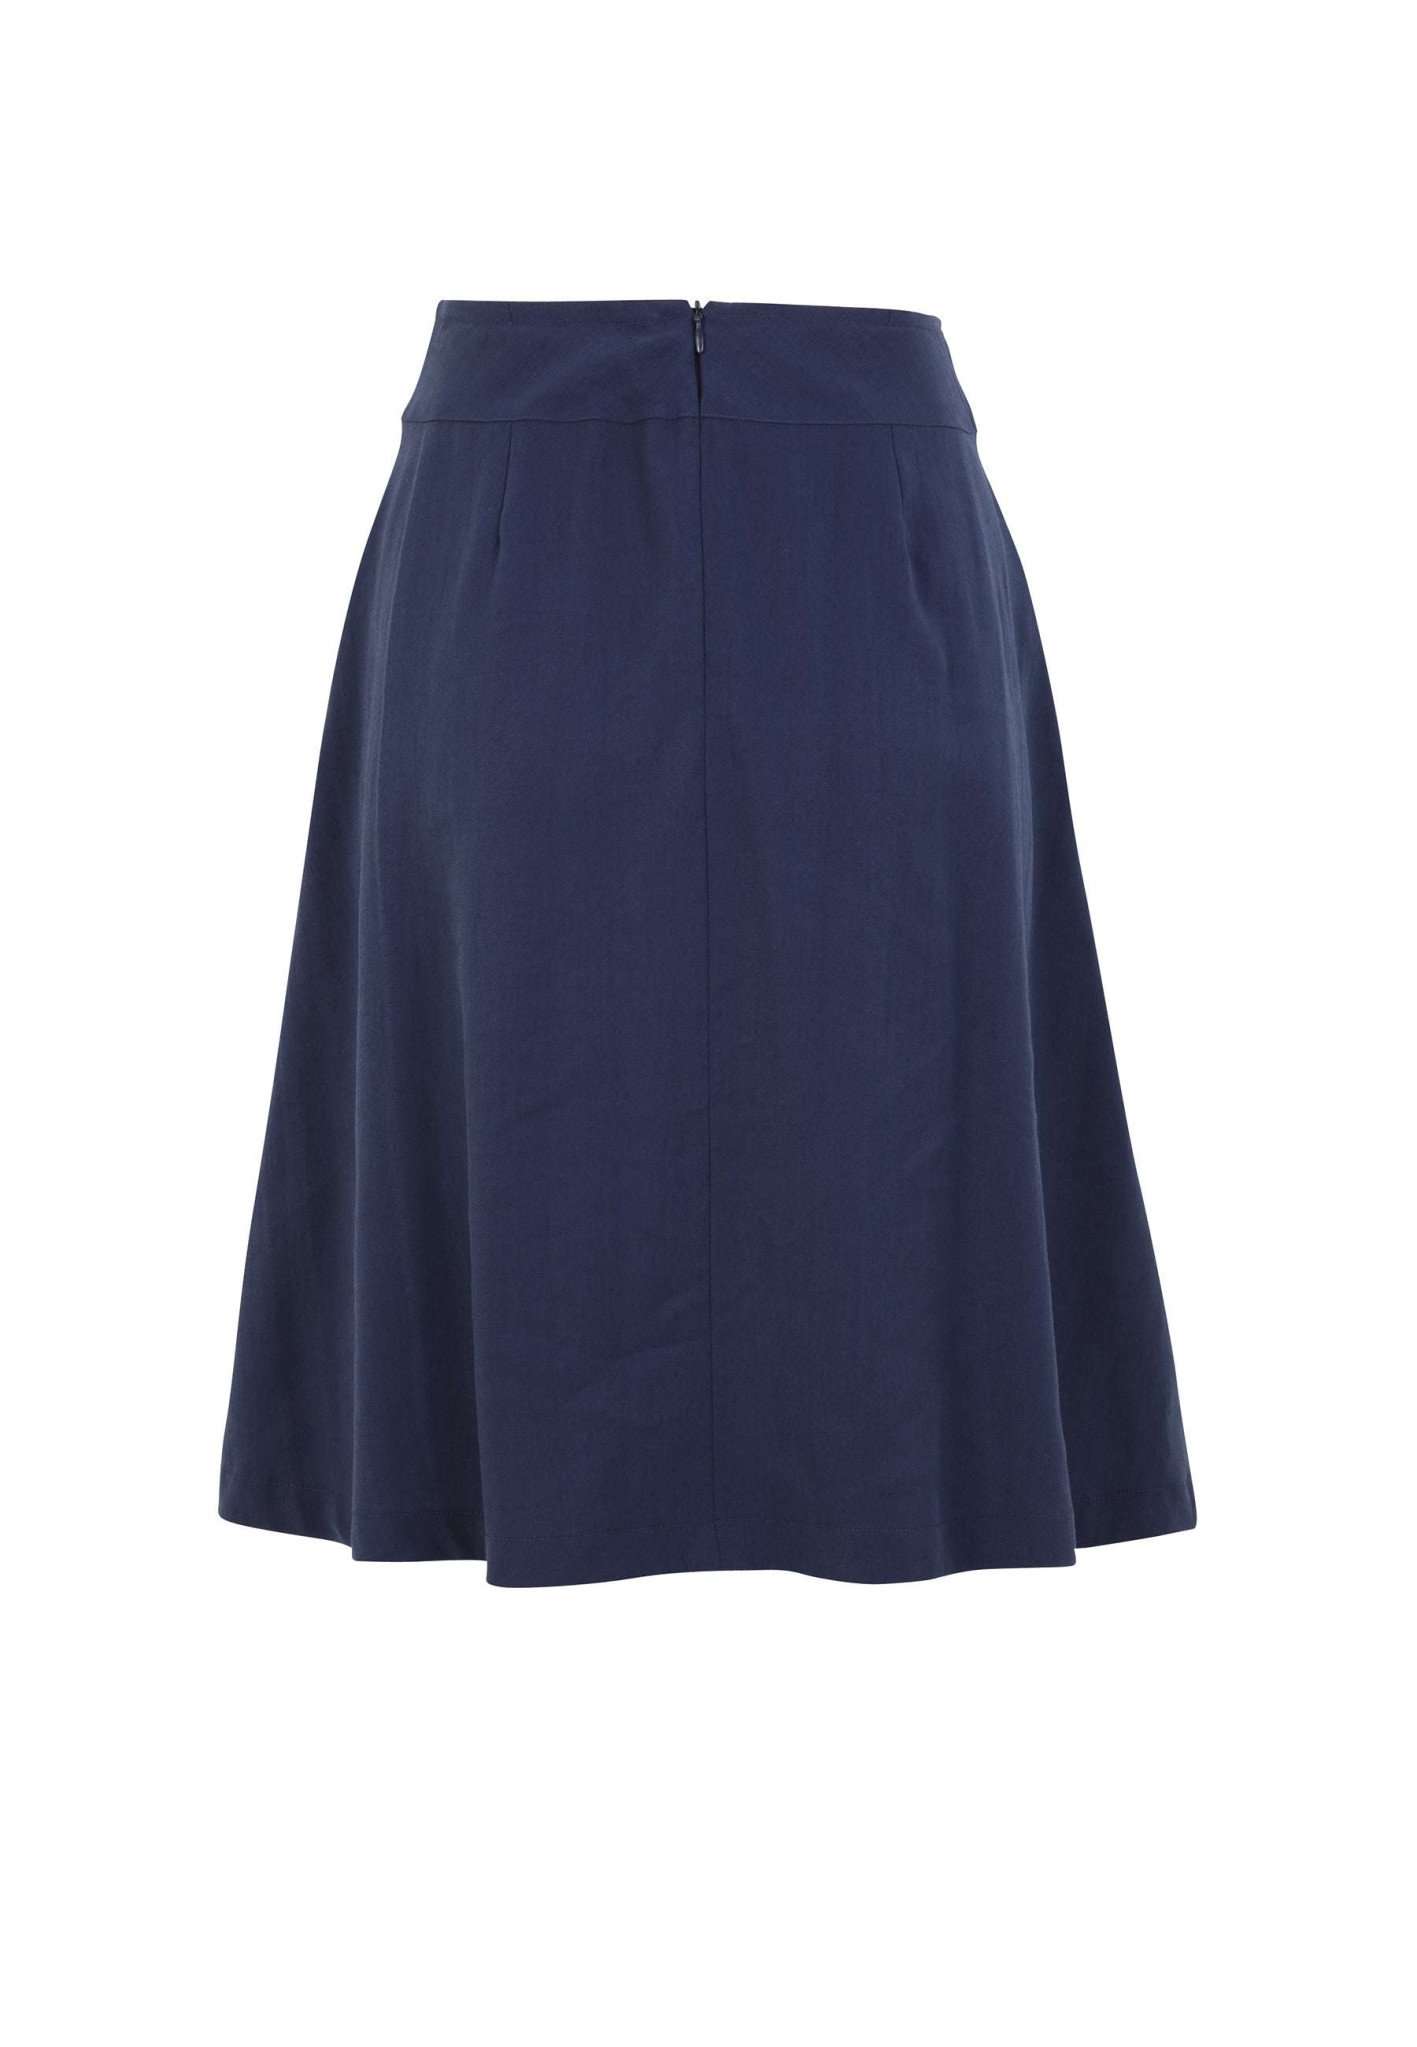 Assis Trench Skirt in Medieval Blue Röcke Tamaris   